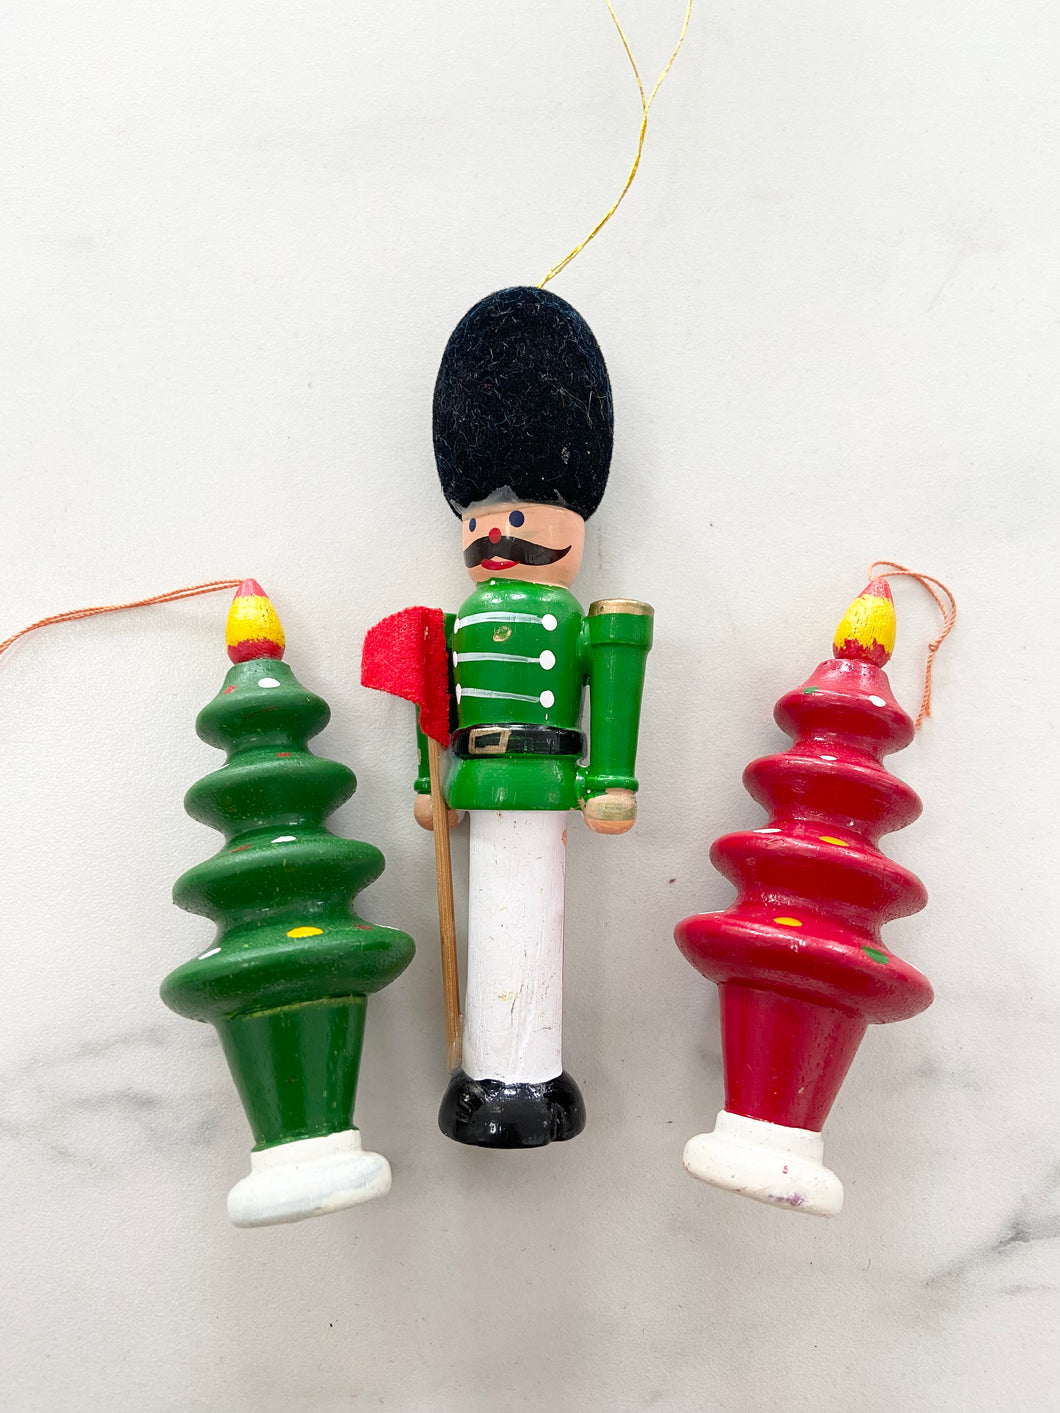 Vintage wooden nutcracker and trees